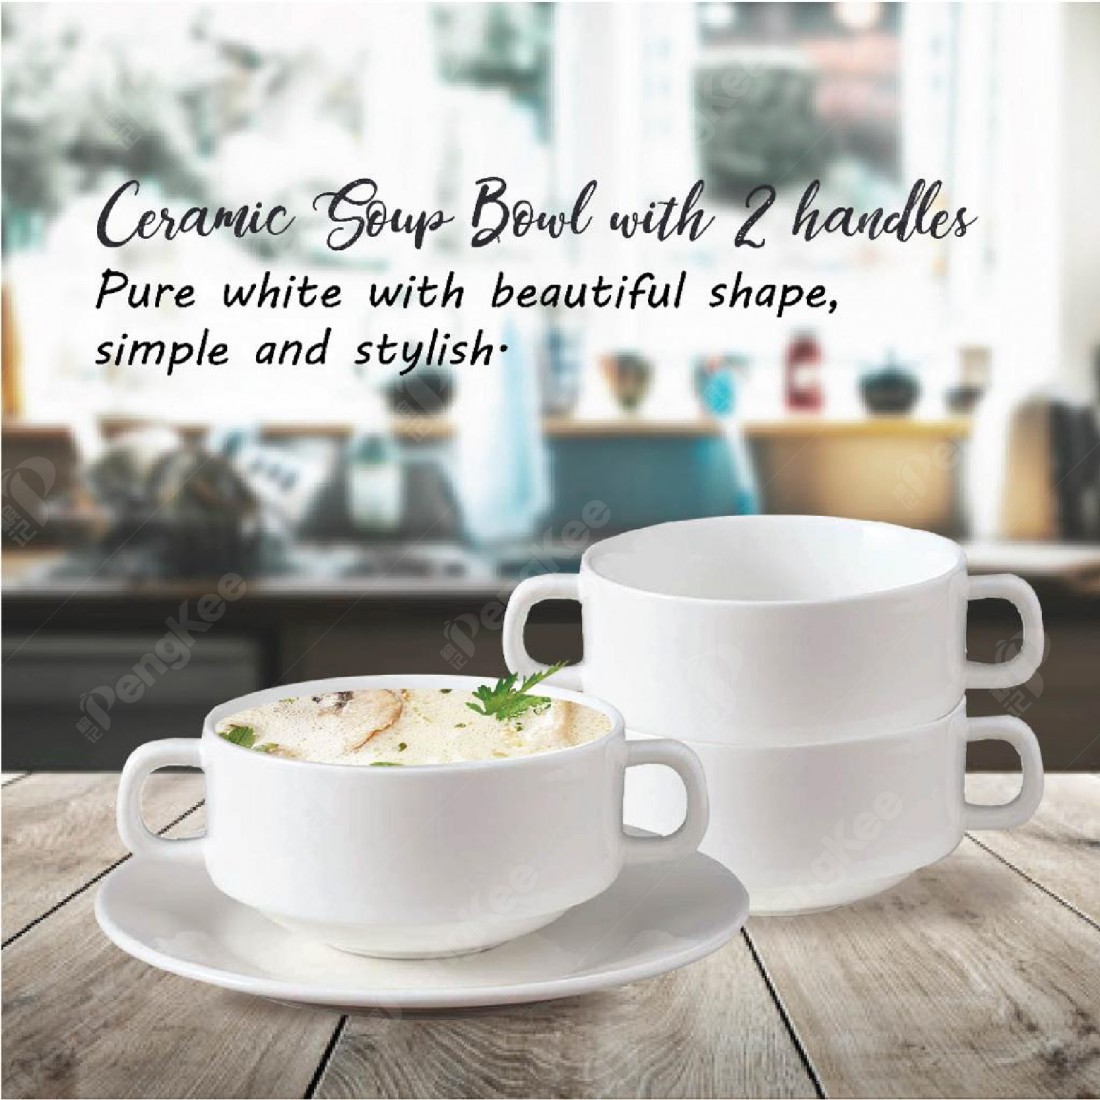 CERAMIC SOUP BOWL WITH 2 HANDLES